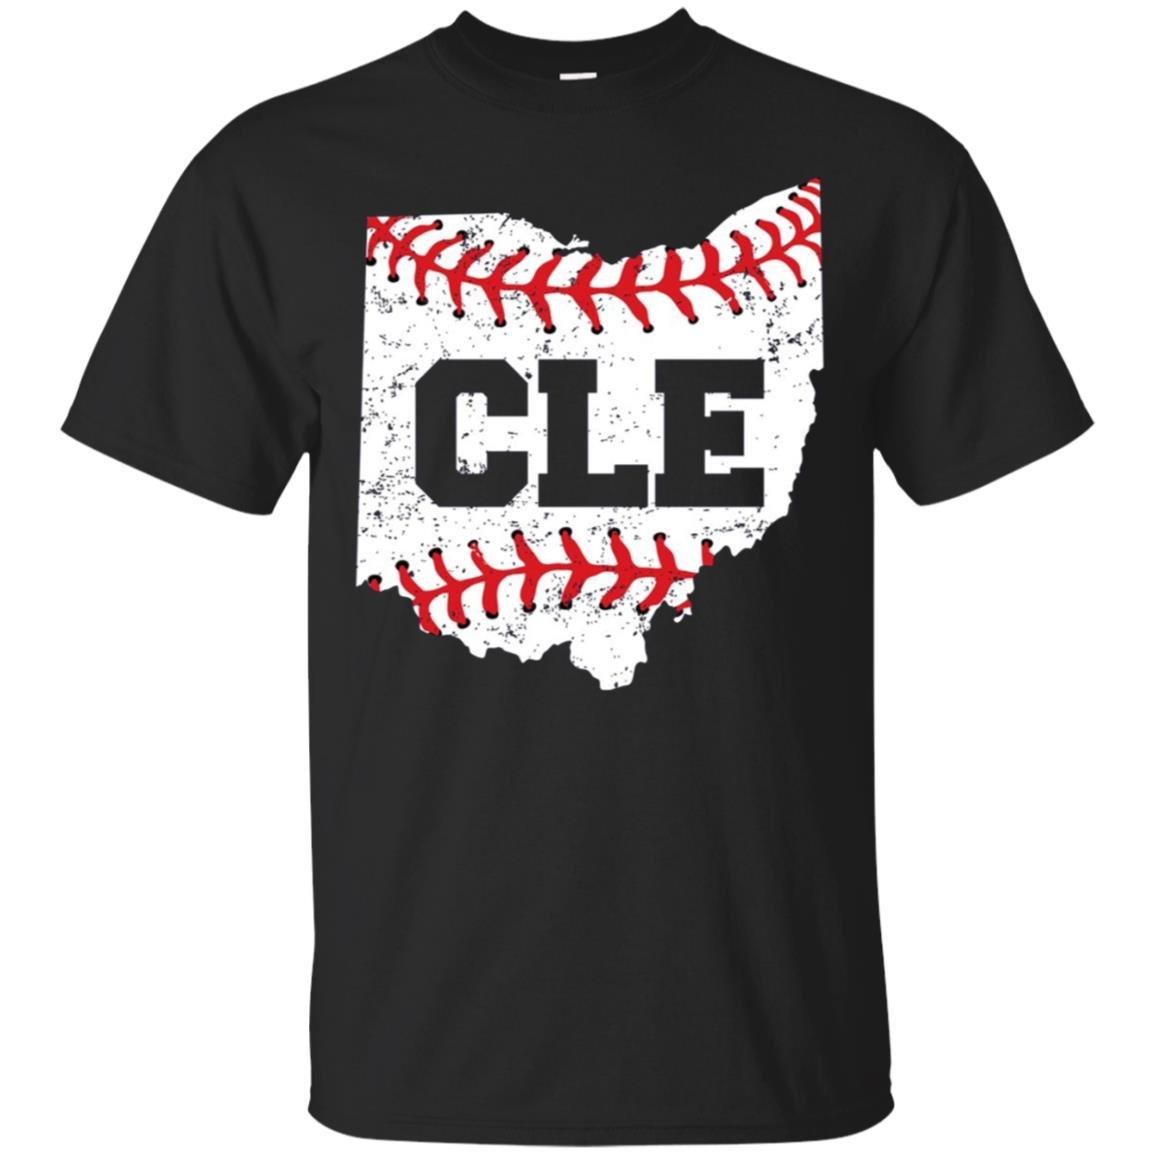 High Quality Distressed Cleveland Ohio Baseball Cle T Shirt